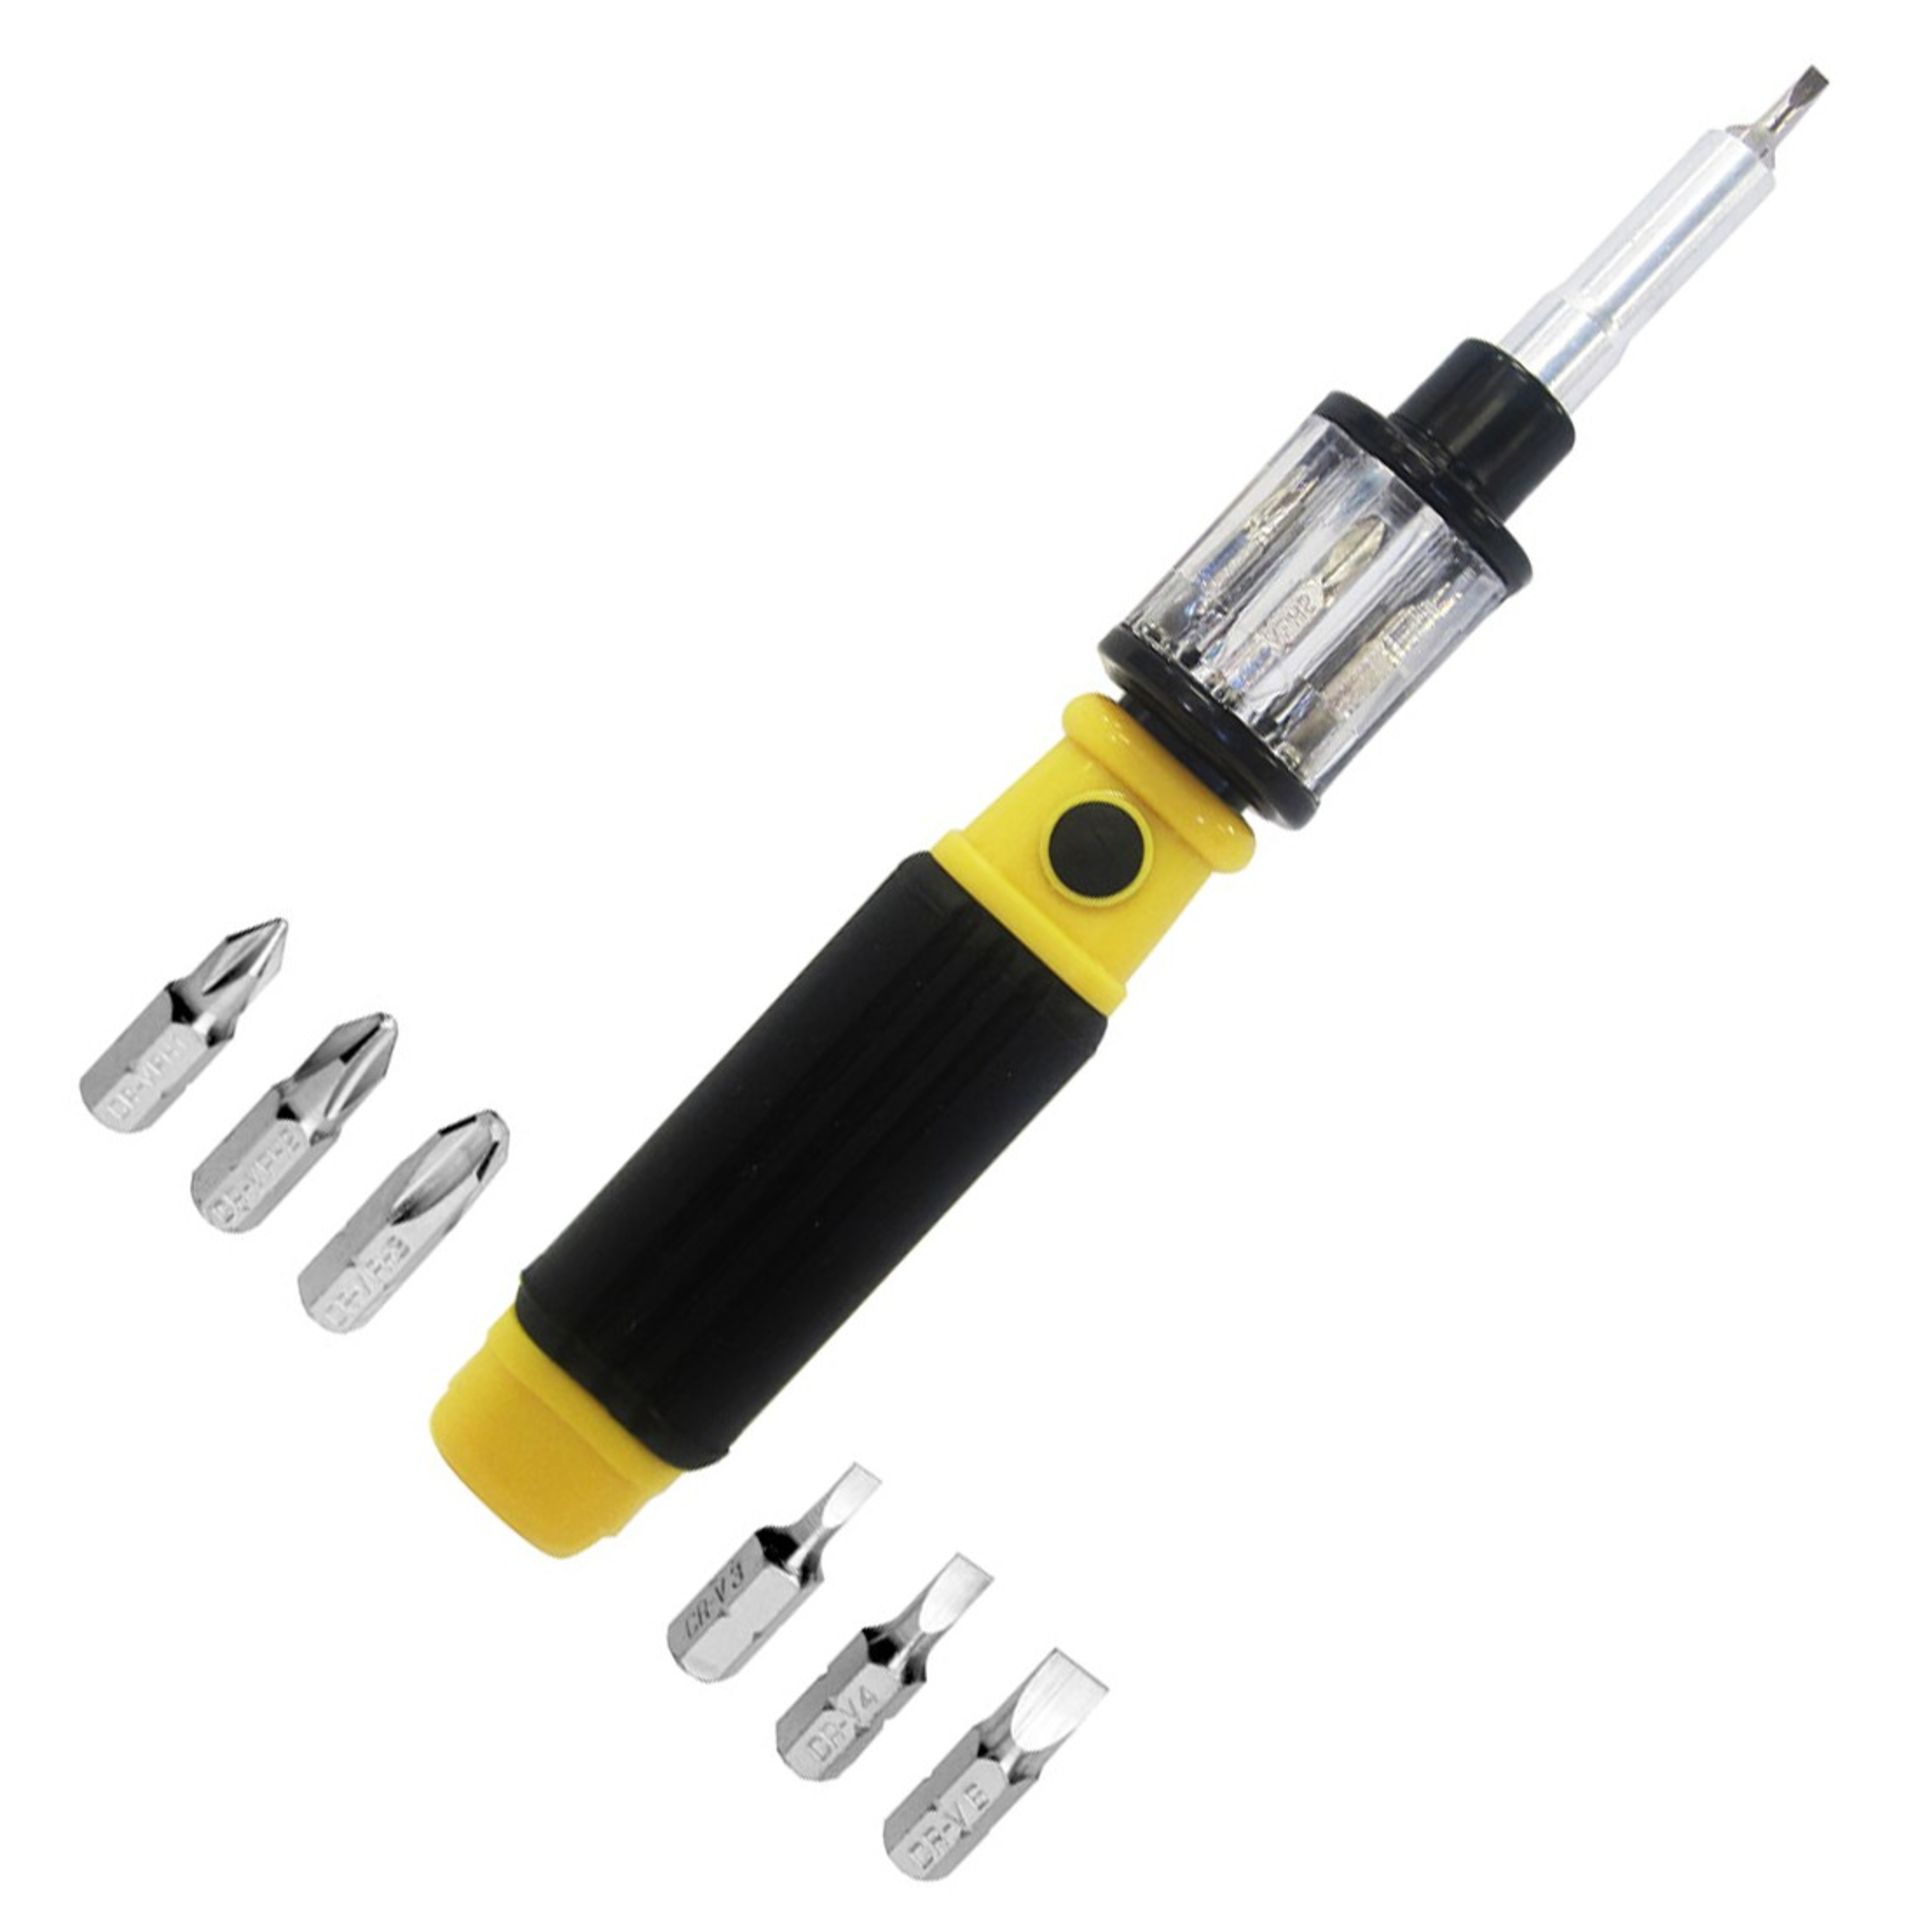 5 x Bit 360 All-in-One Screwdriver and Bit Set - The Screwdrive That Changes Bits Quickly and Easily